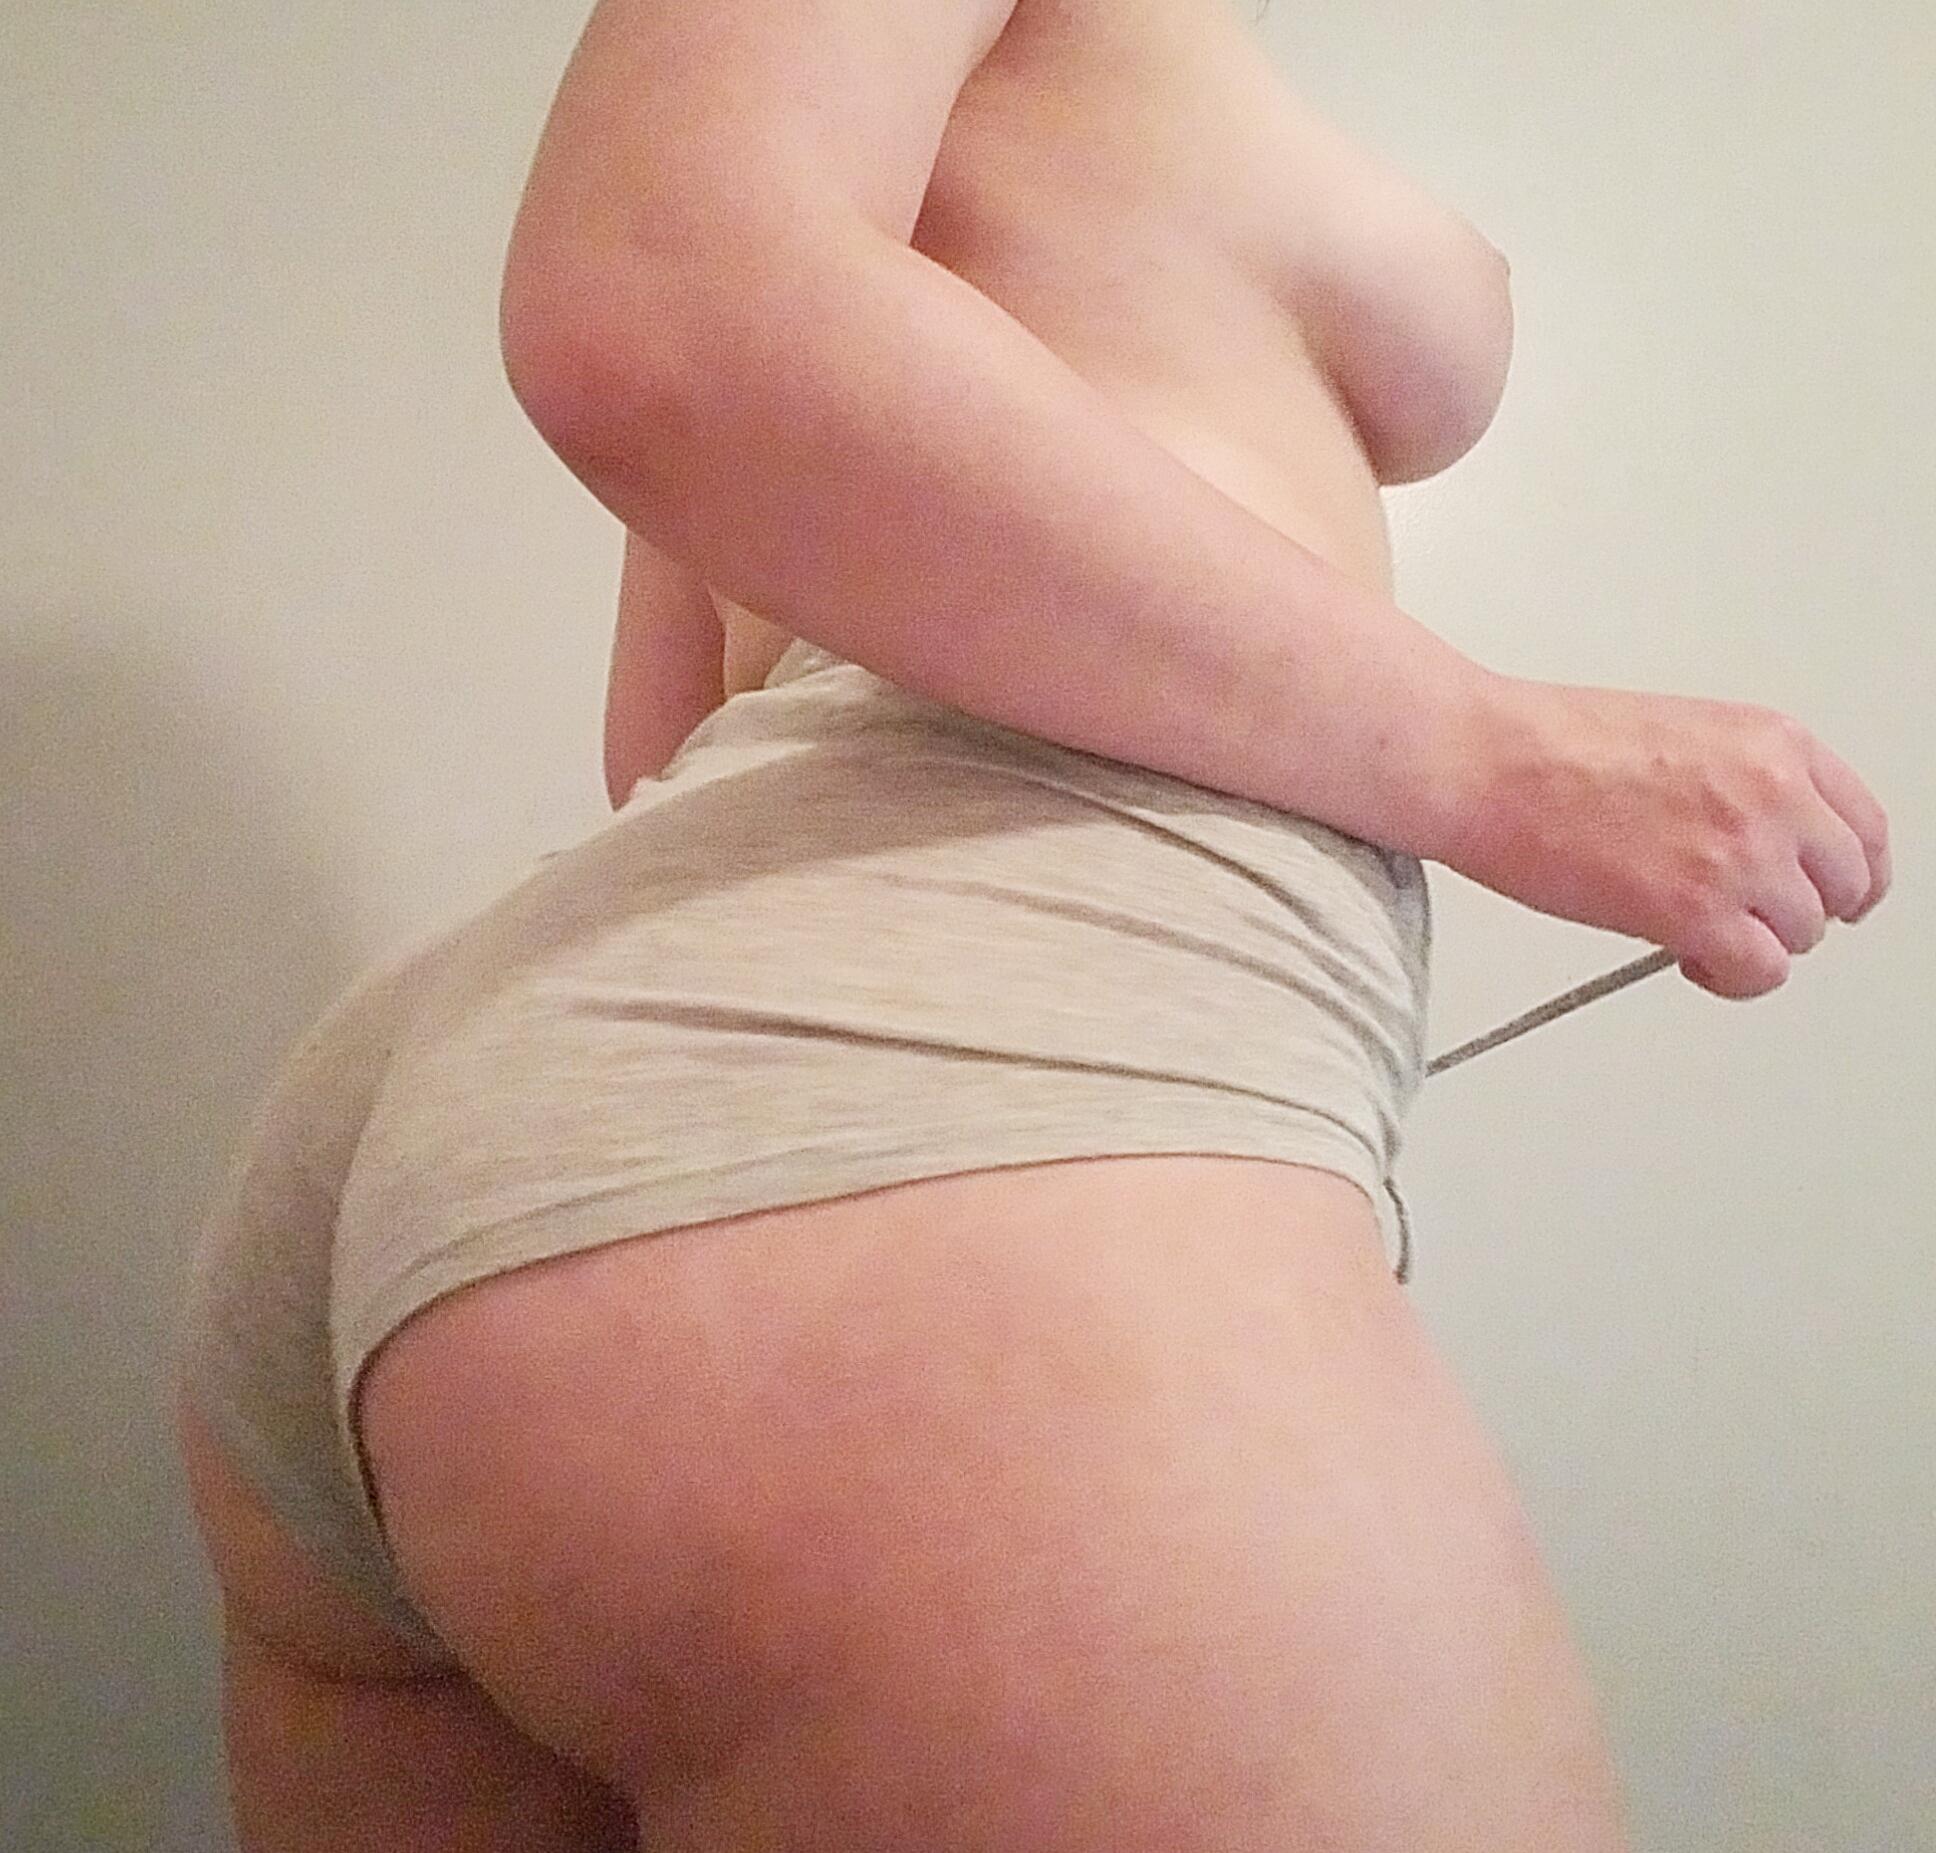 These shorts are soft but my ass is softer